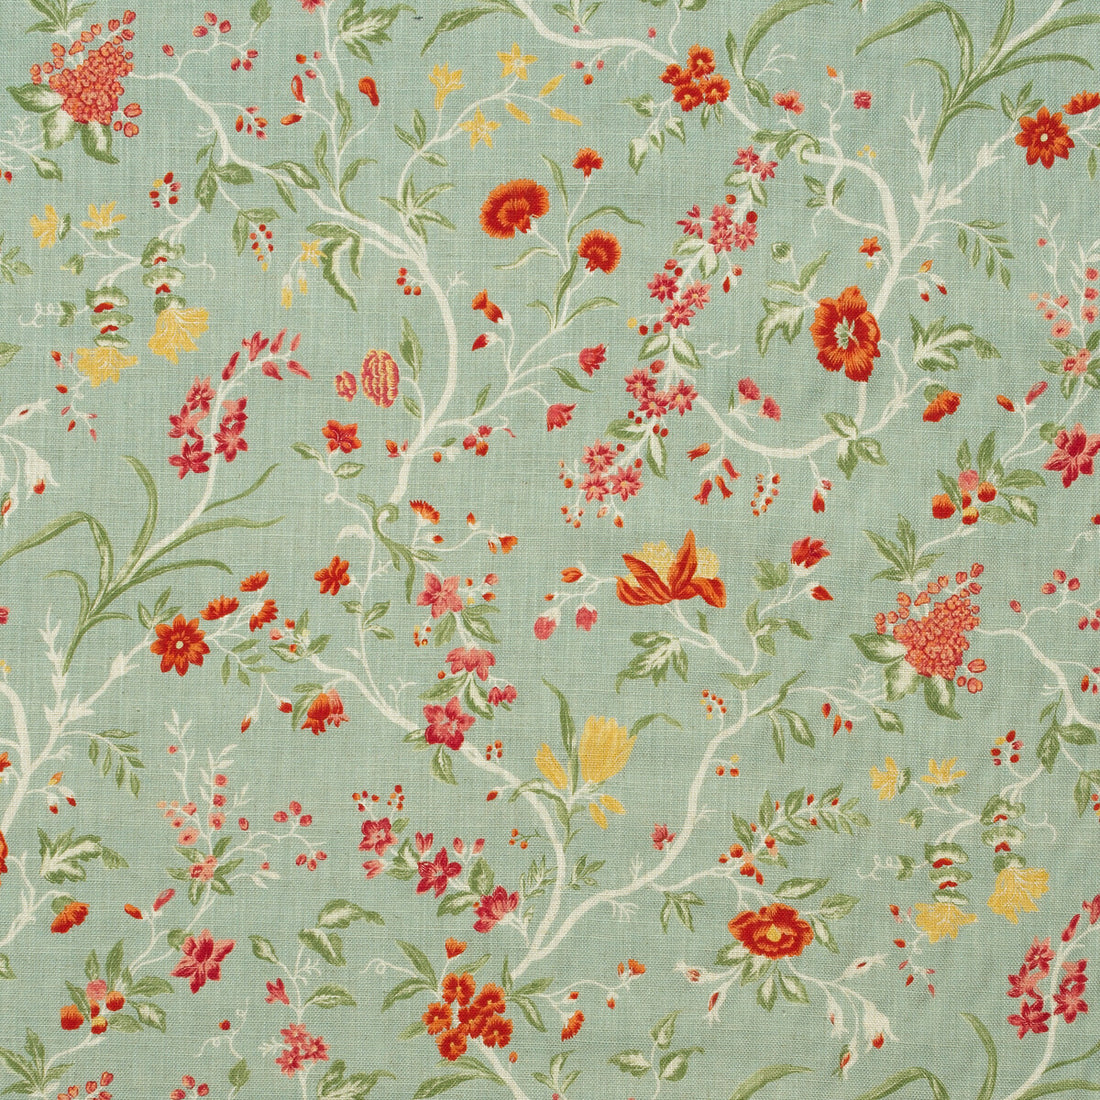 Ramble fabric in duck egg color - pattern AM100409.512.0 - by Kravet Couture in the Andrew Martin The Secret Garden collection